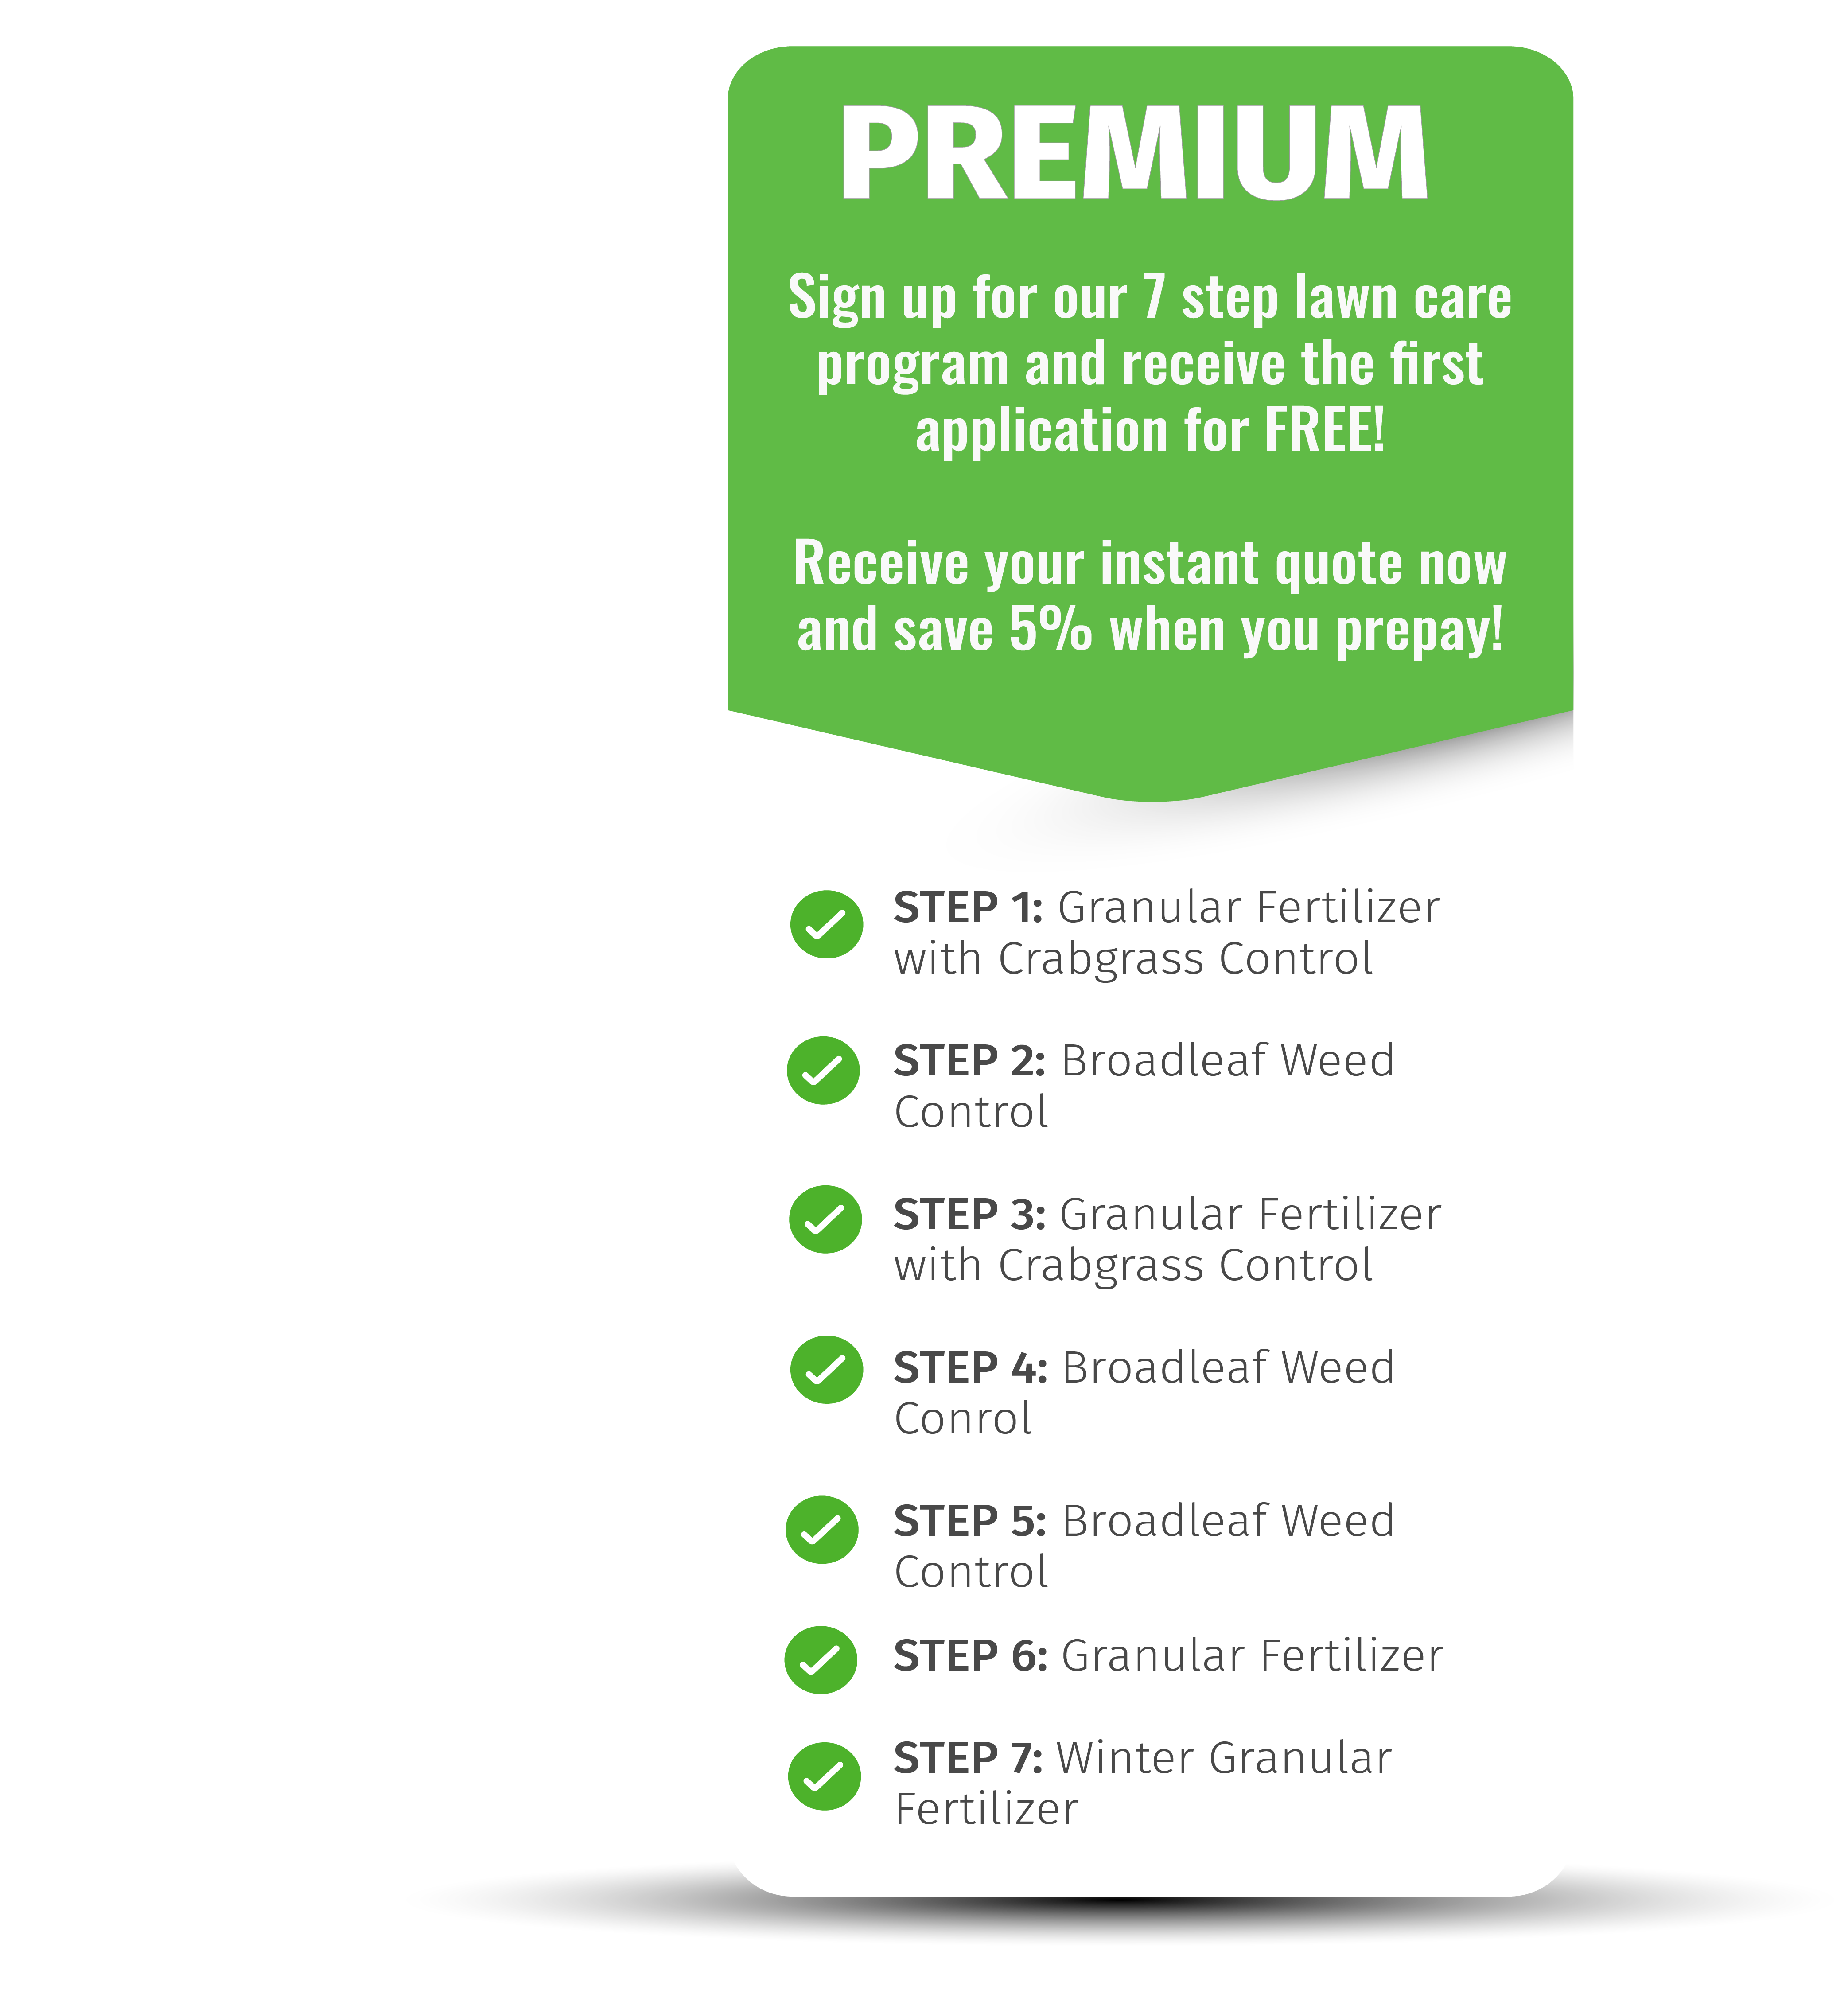 An infographic showing Spring Touch's Premium 7-step lawn care program.